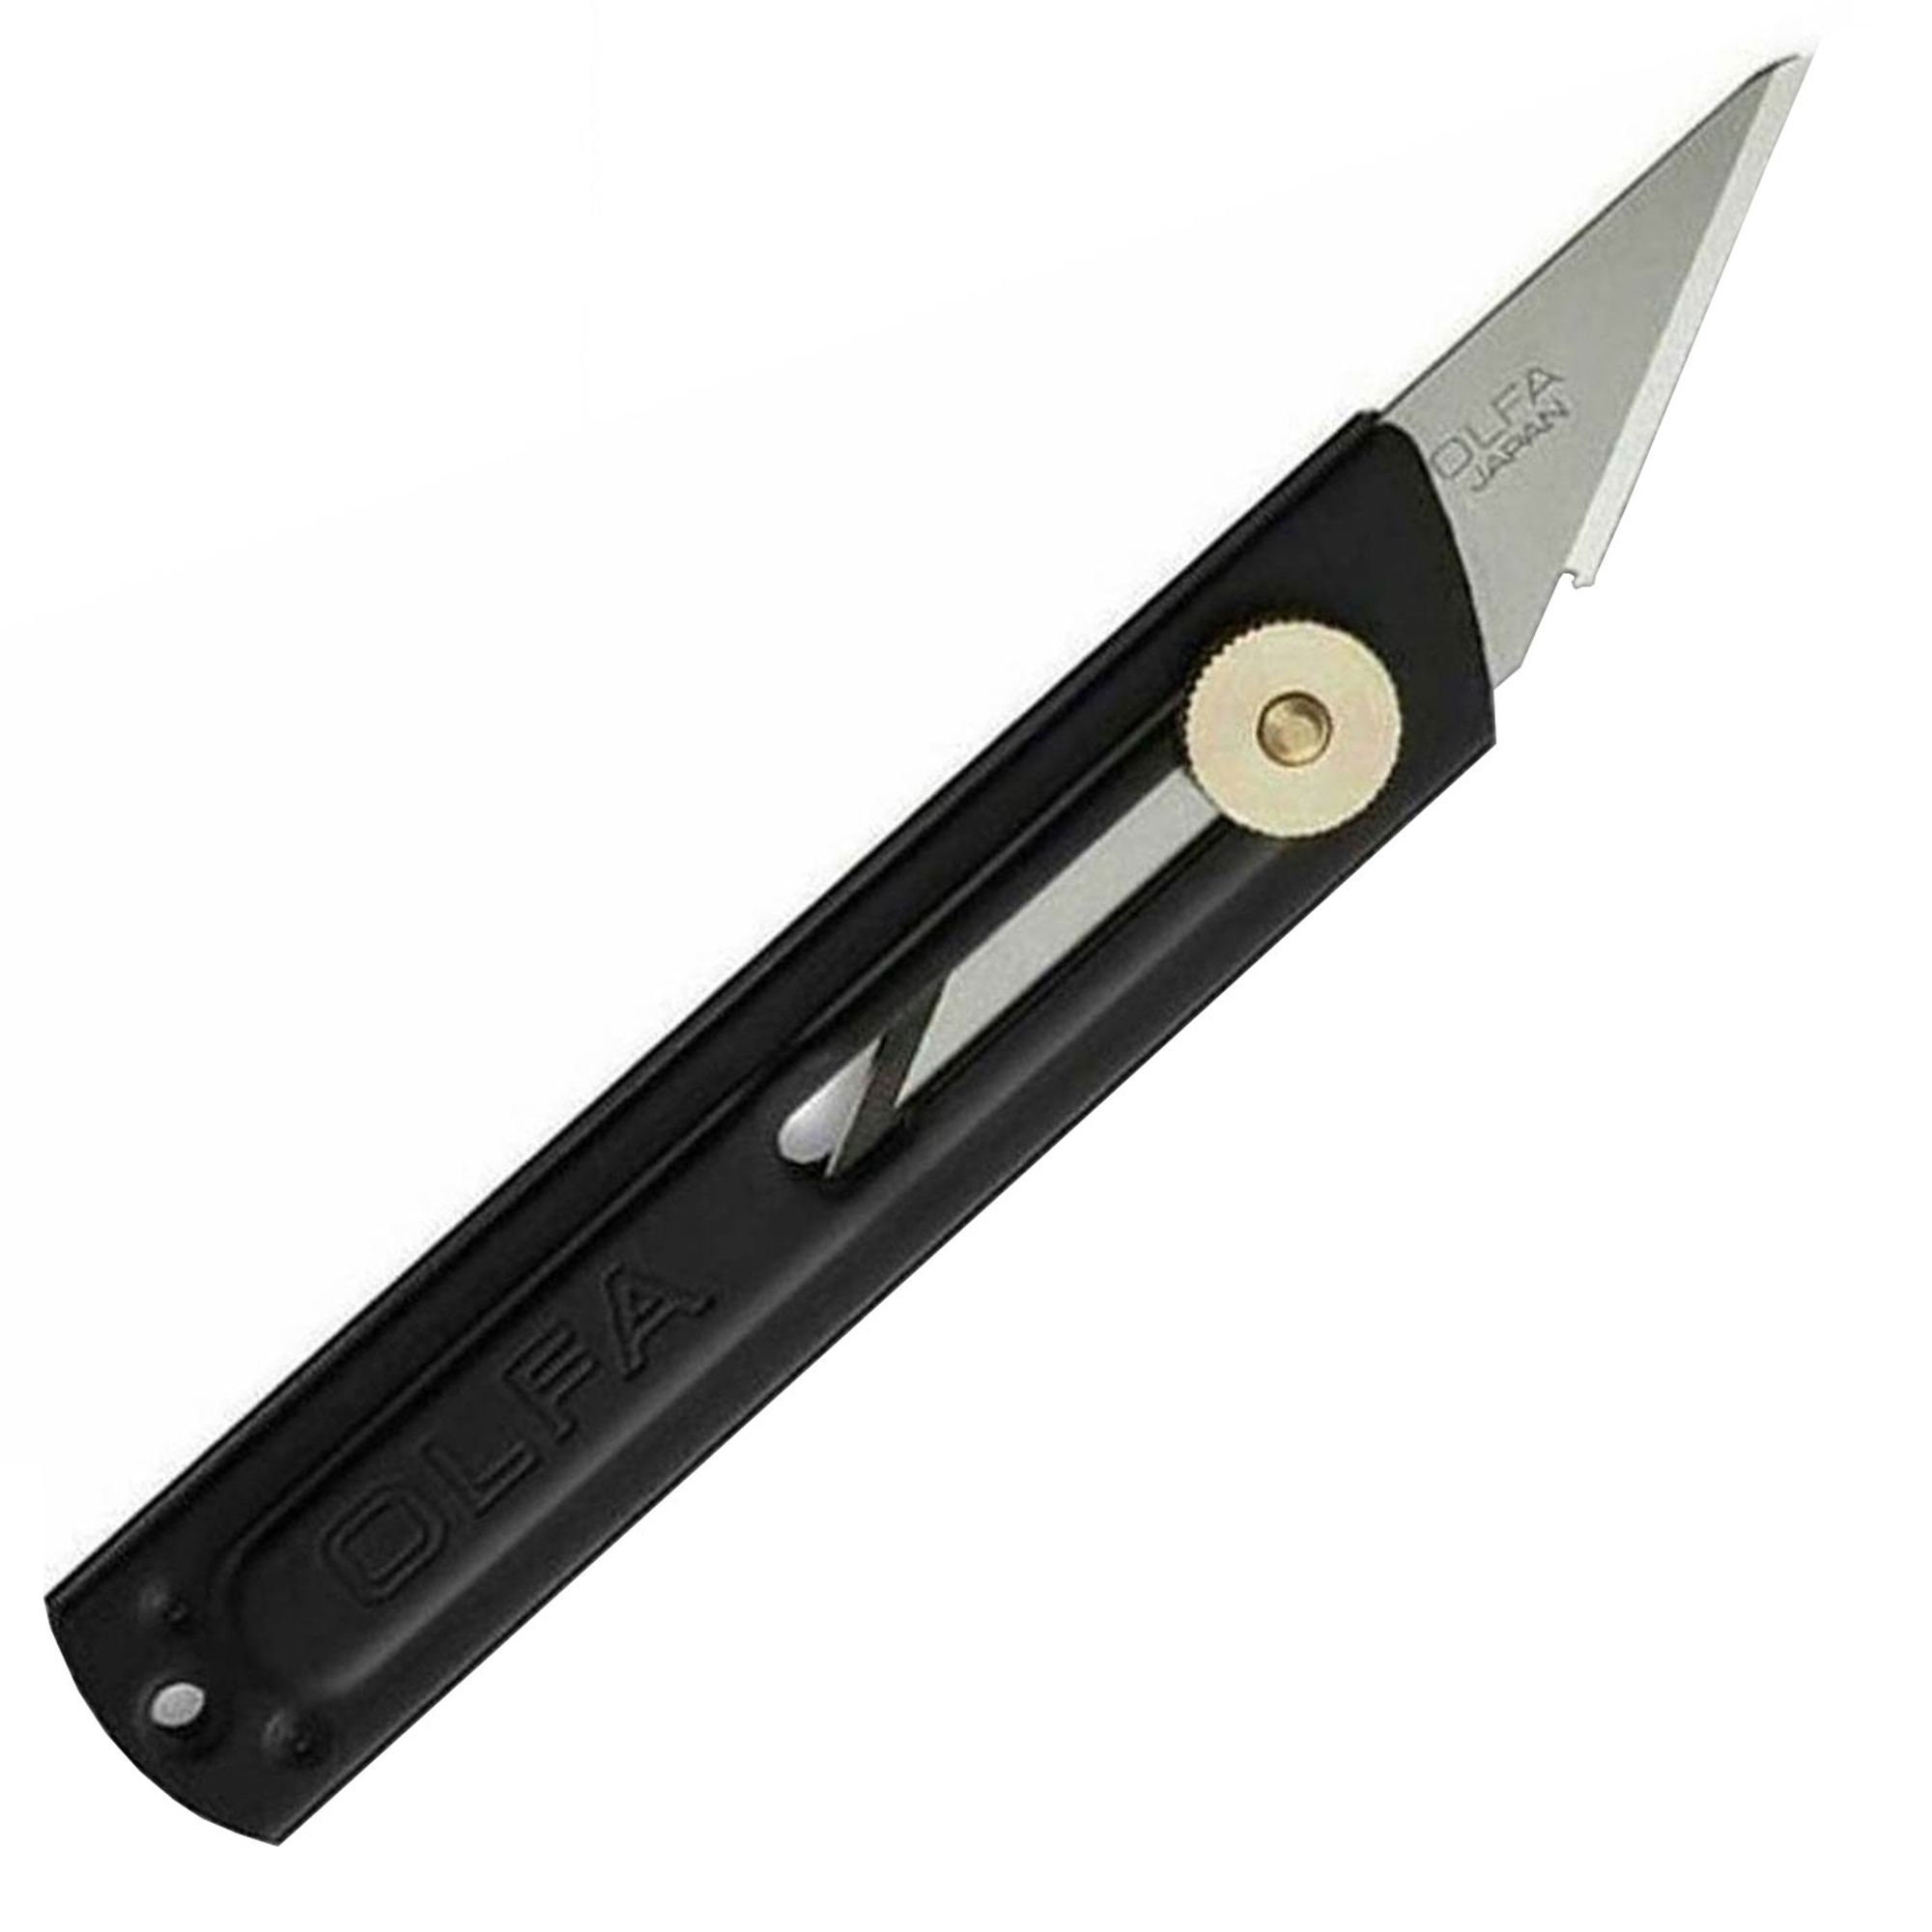 OLFA 9mm Stainless Steel Graphics Knife (SAC-1) - Multi-Purpose Retractable  Art Utility Precision Knife w/Snap-Off Blade, Replacement Blades: Any OLFA